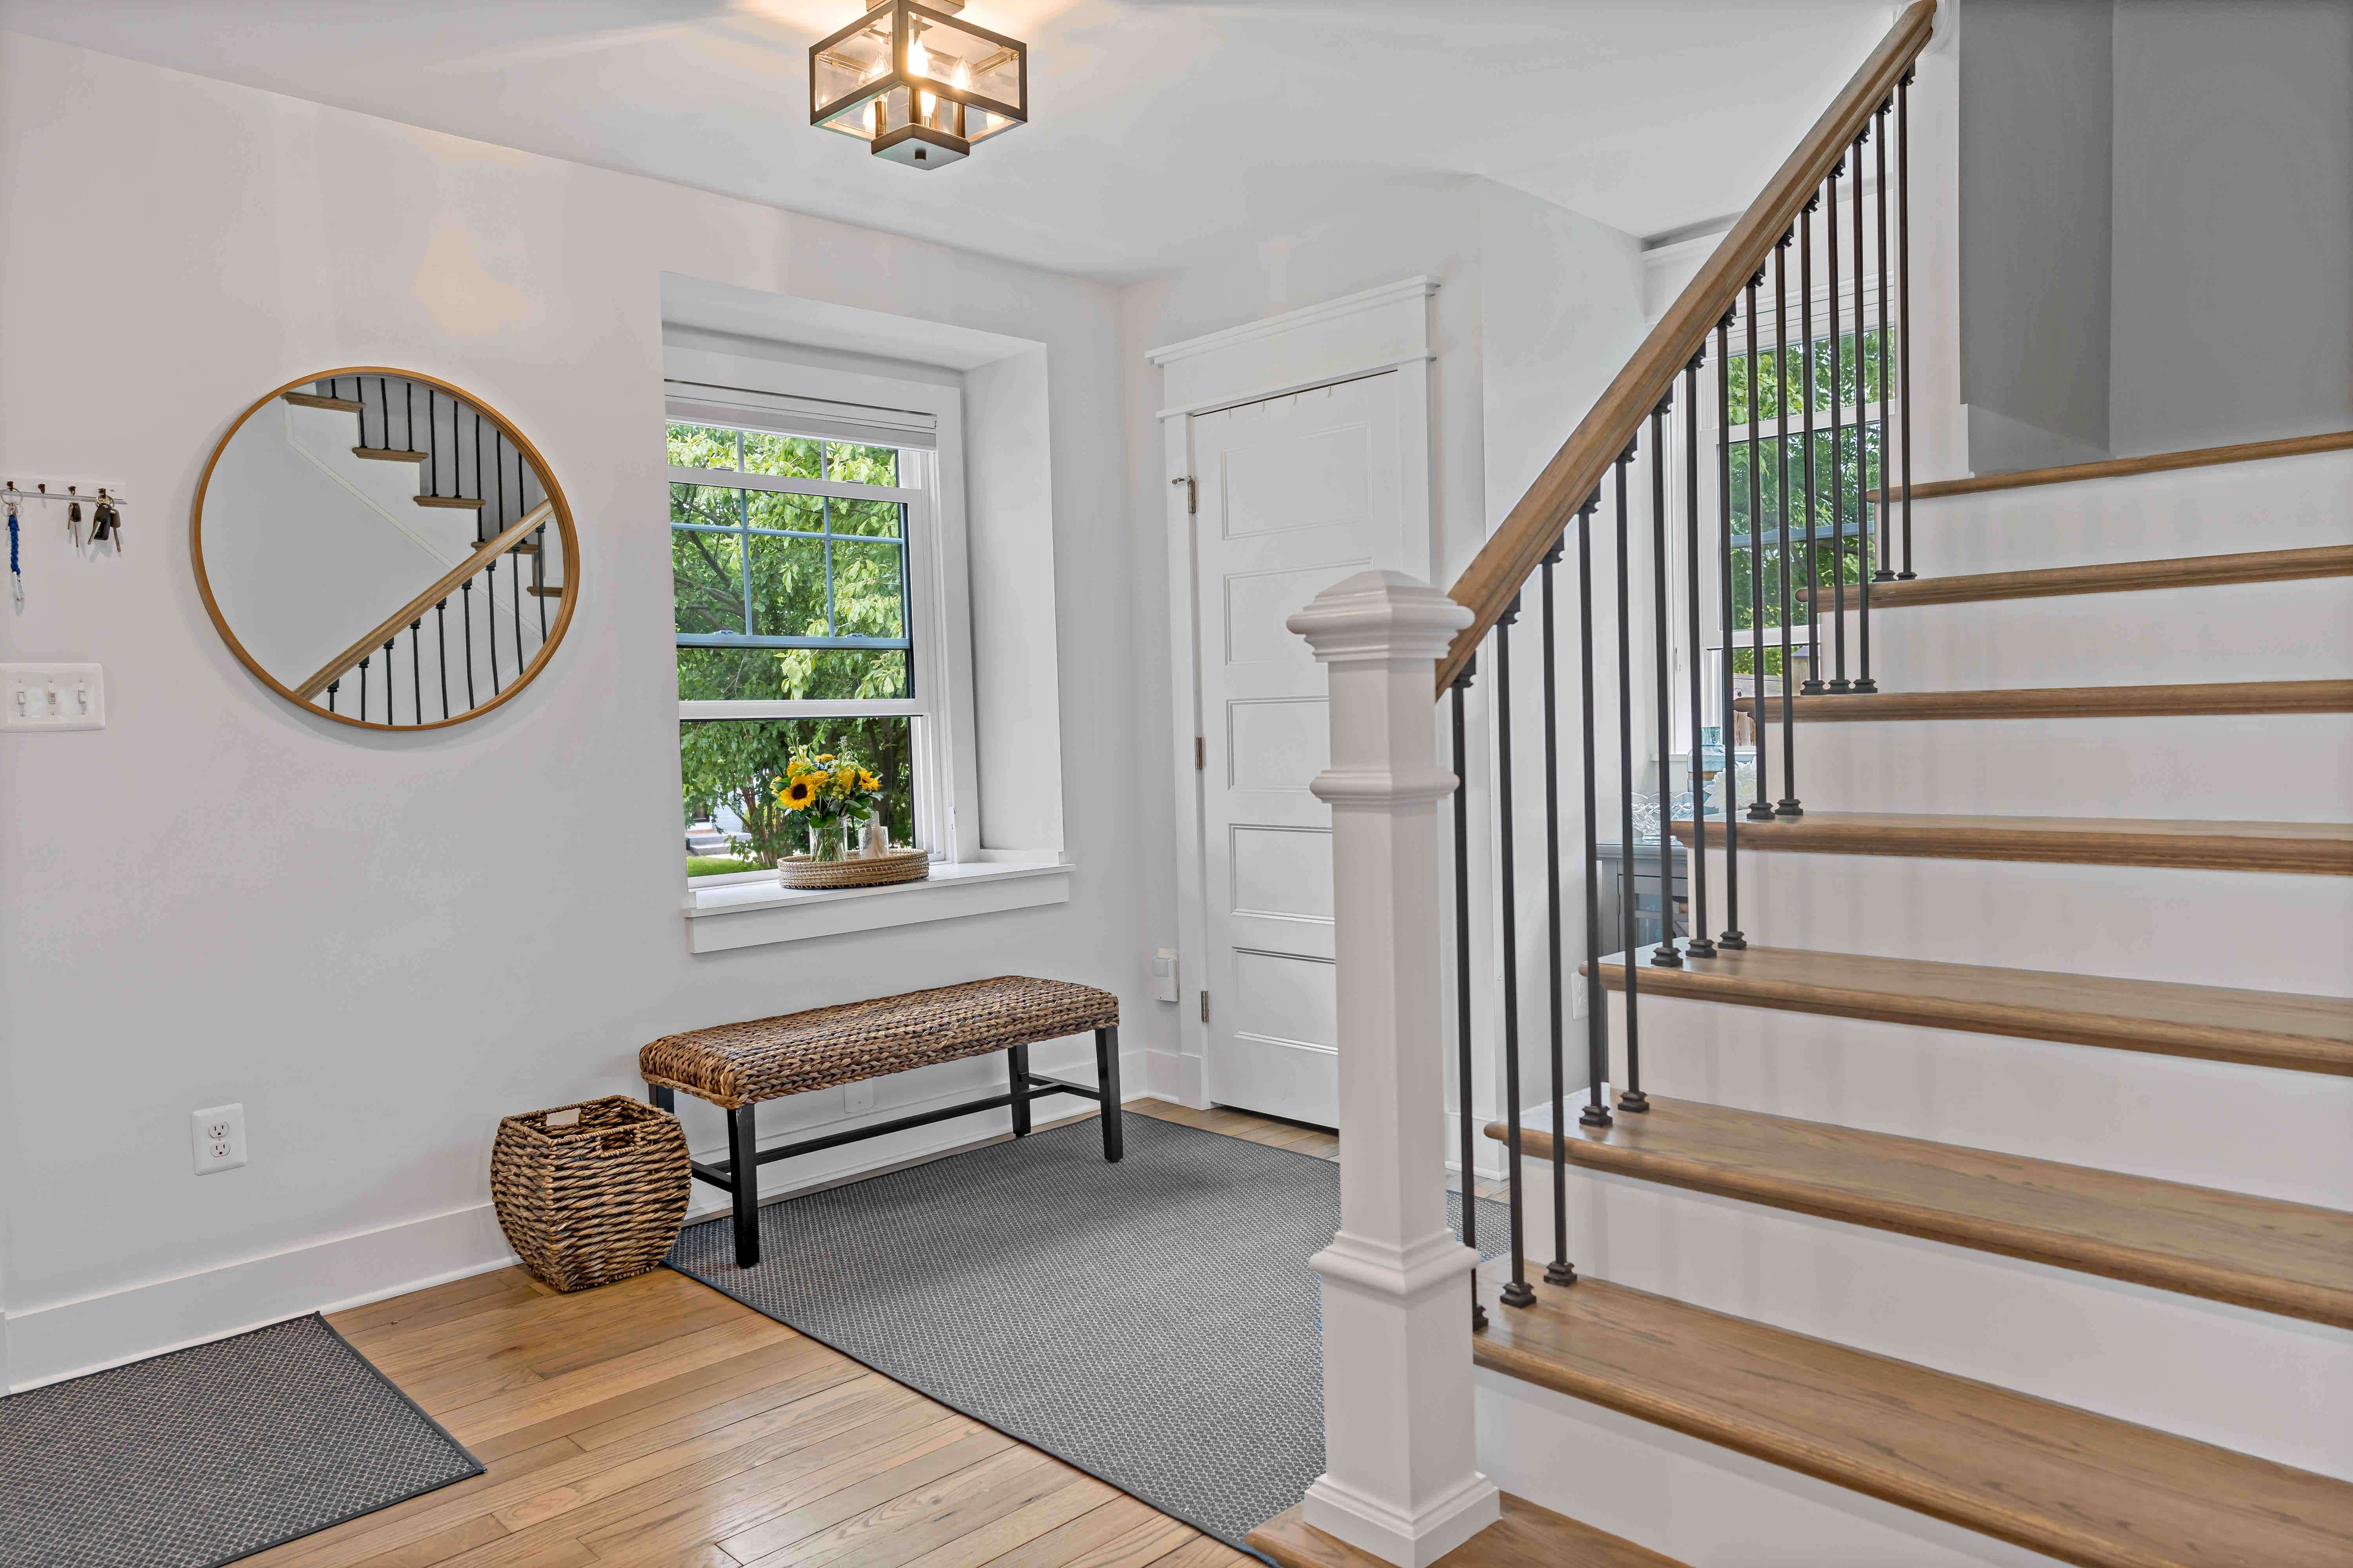 Hardwood floors foyer with white walls and wood staircase leading upstairs